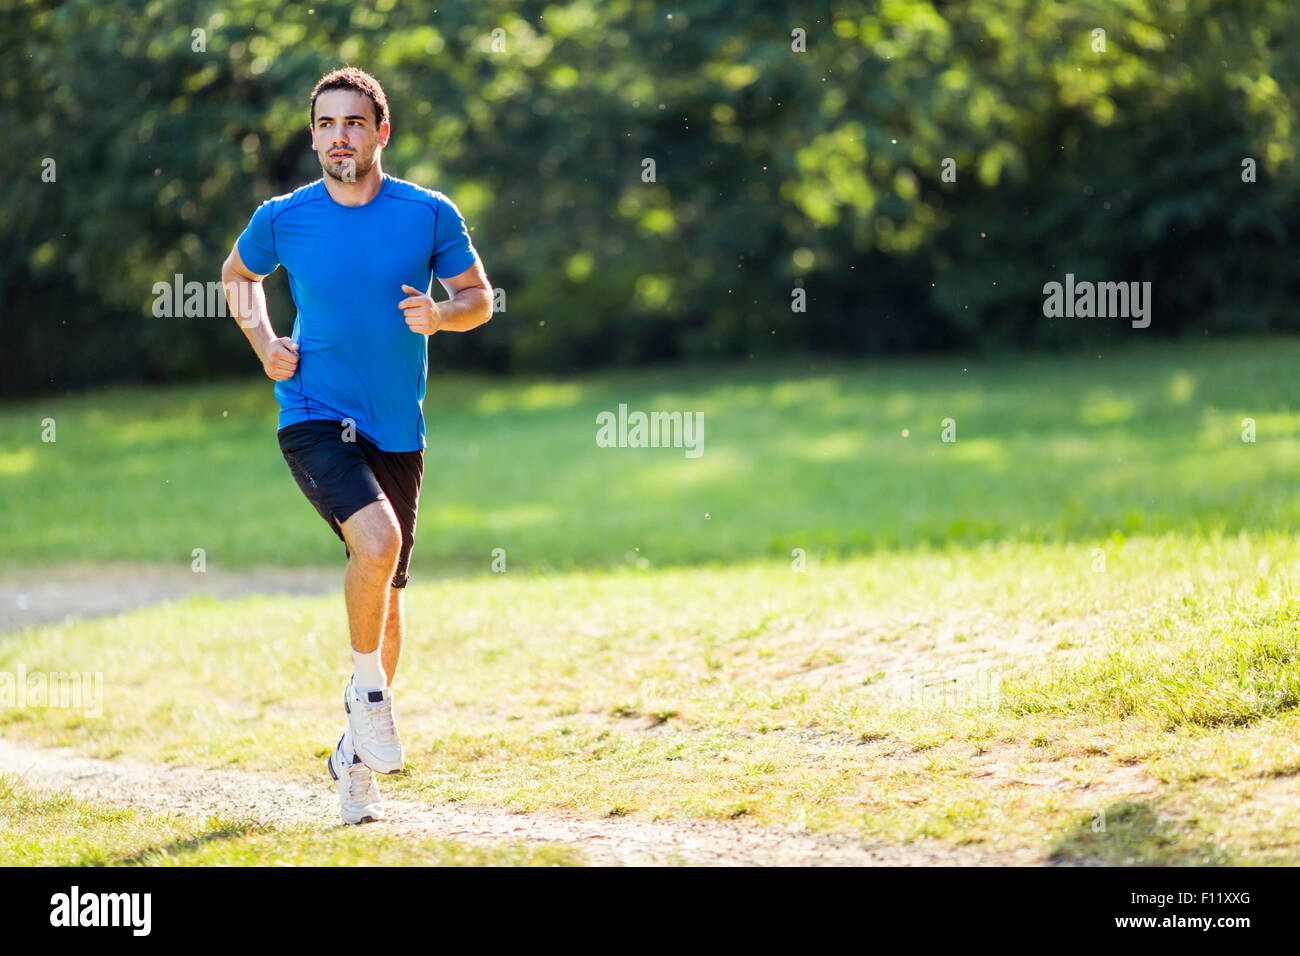 Young fit athlete jogging outdoors Stock Photo